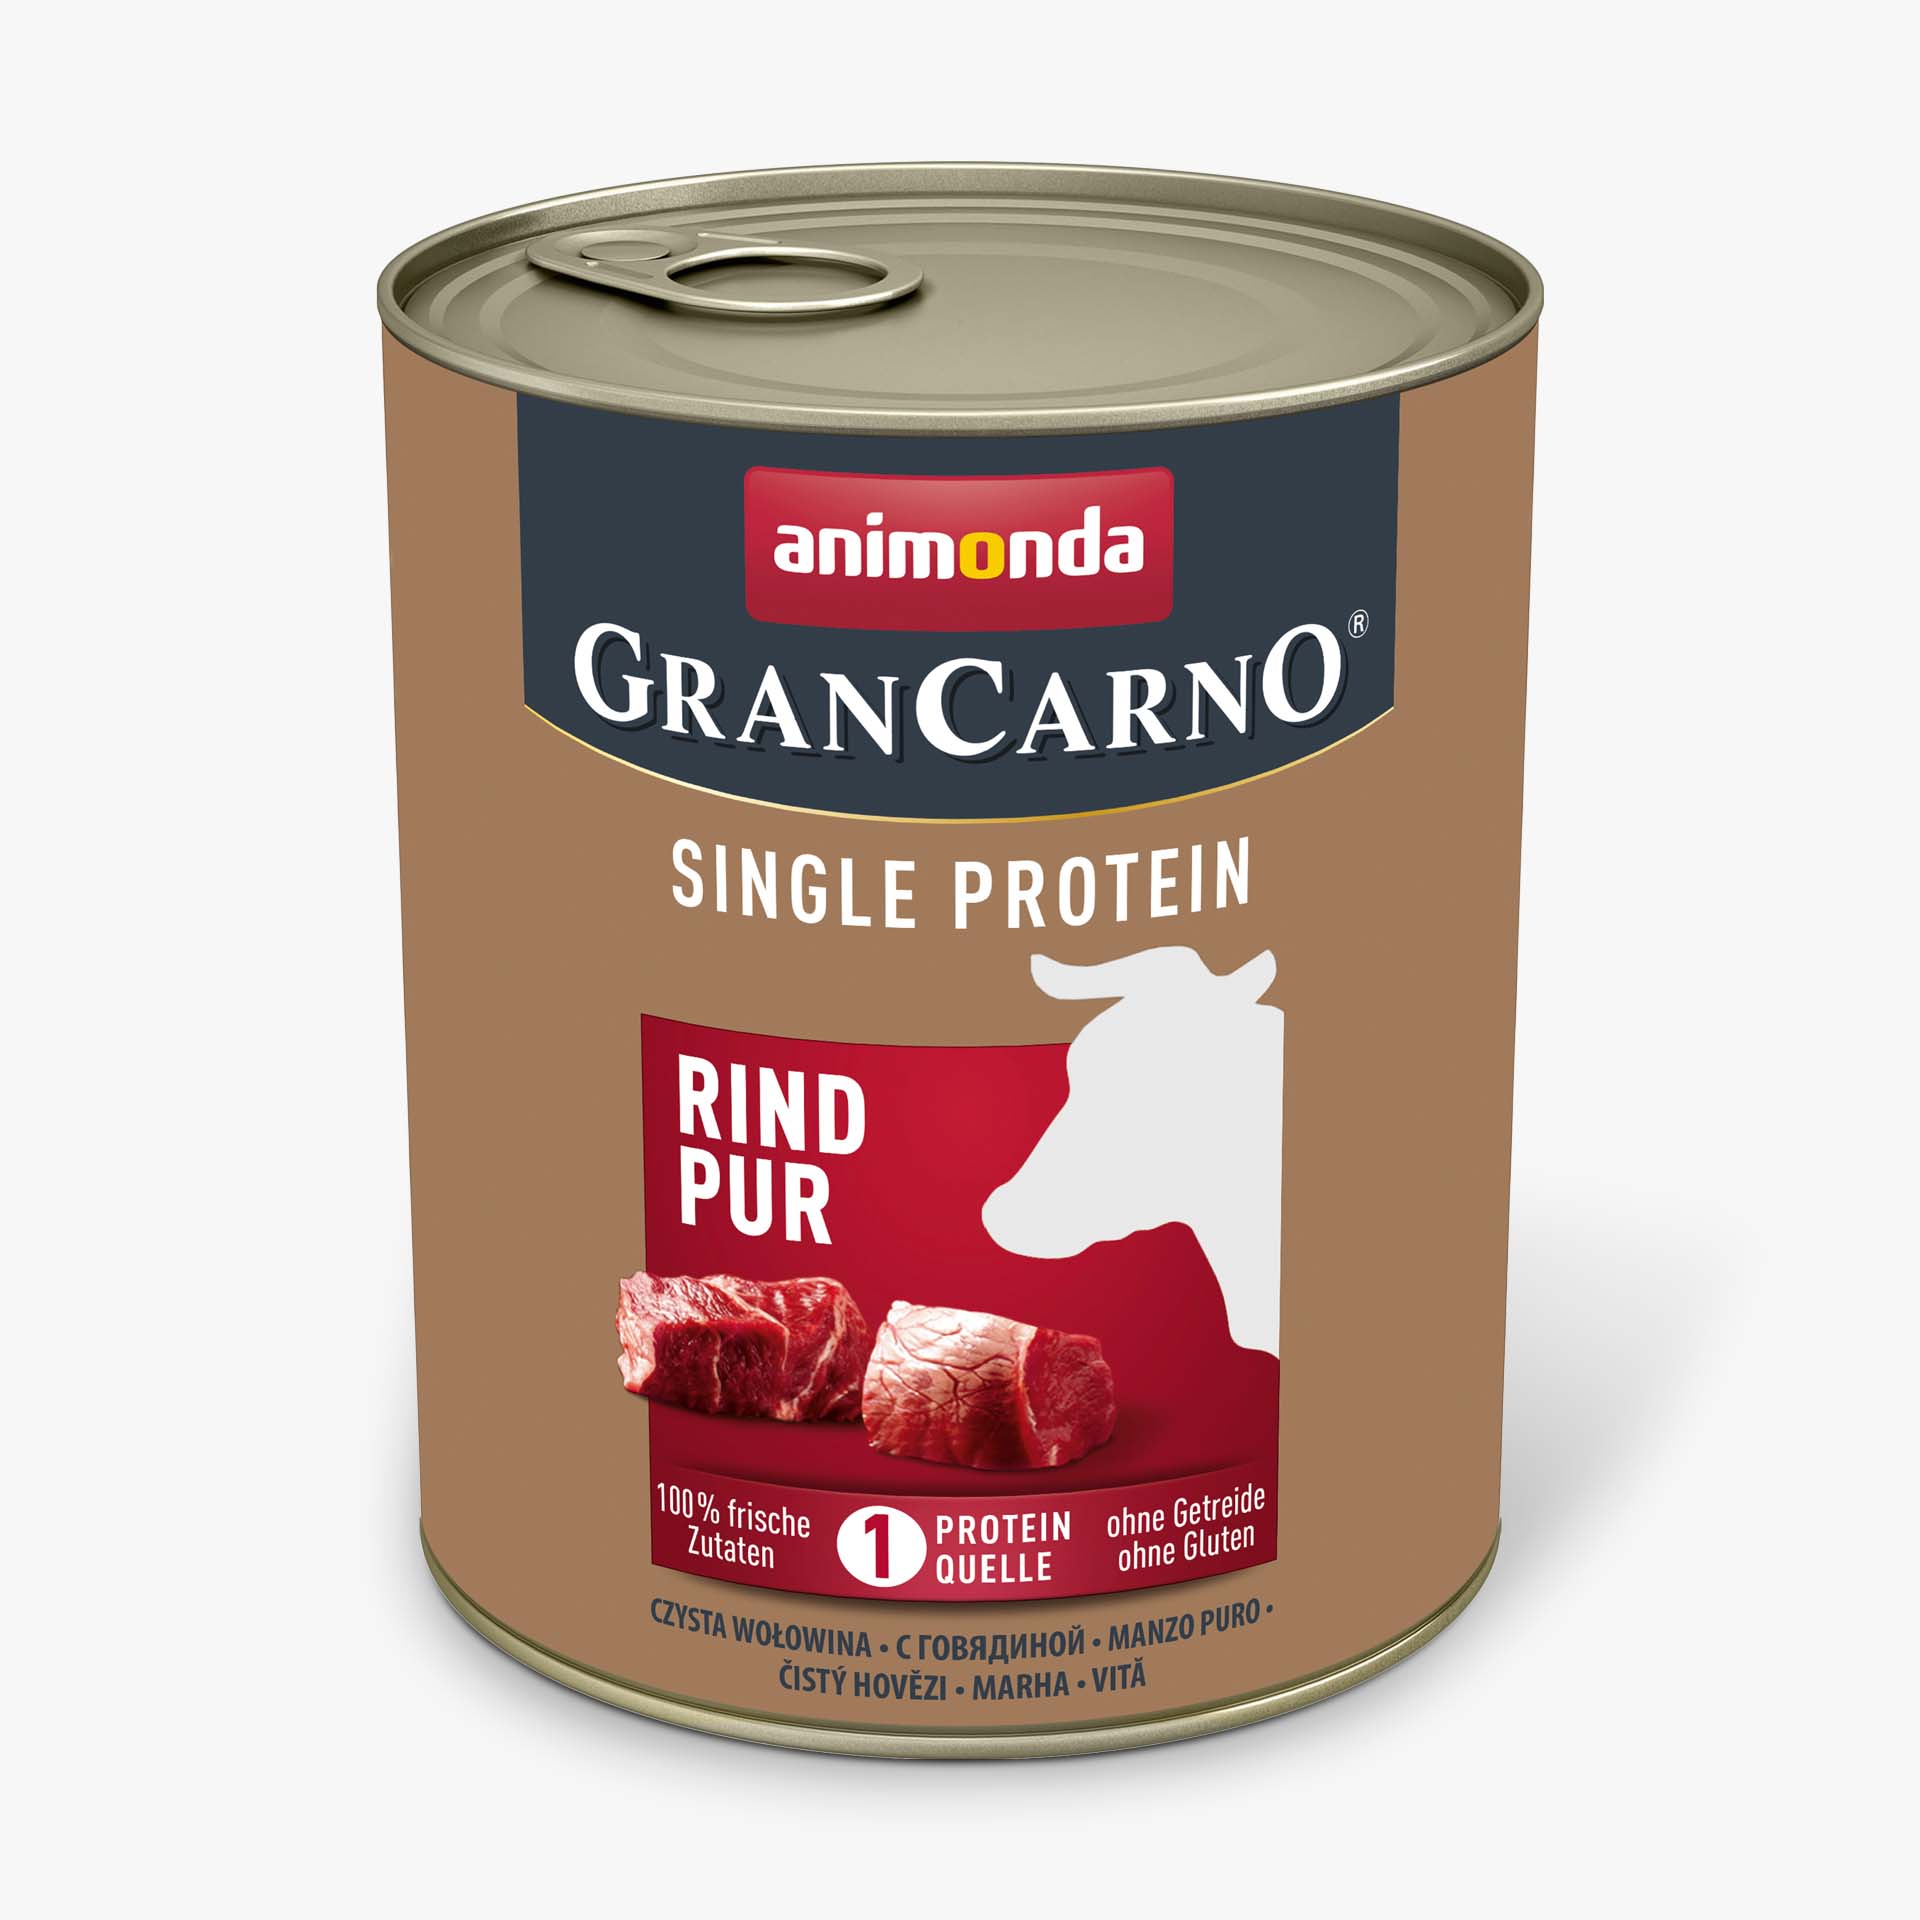 GranCarno Adult Single Protein Rind pur